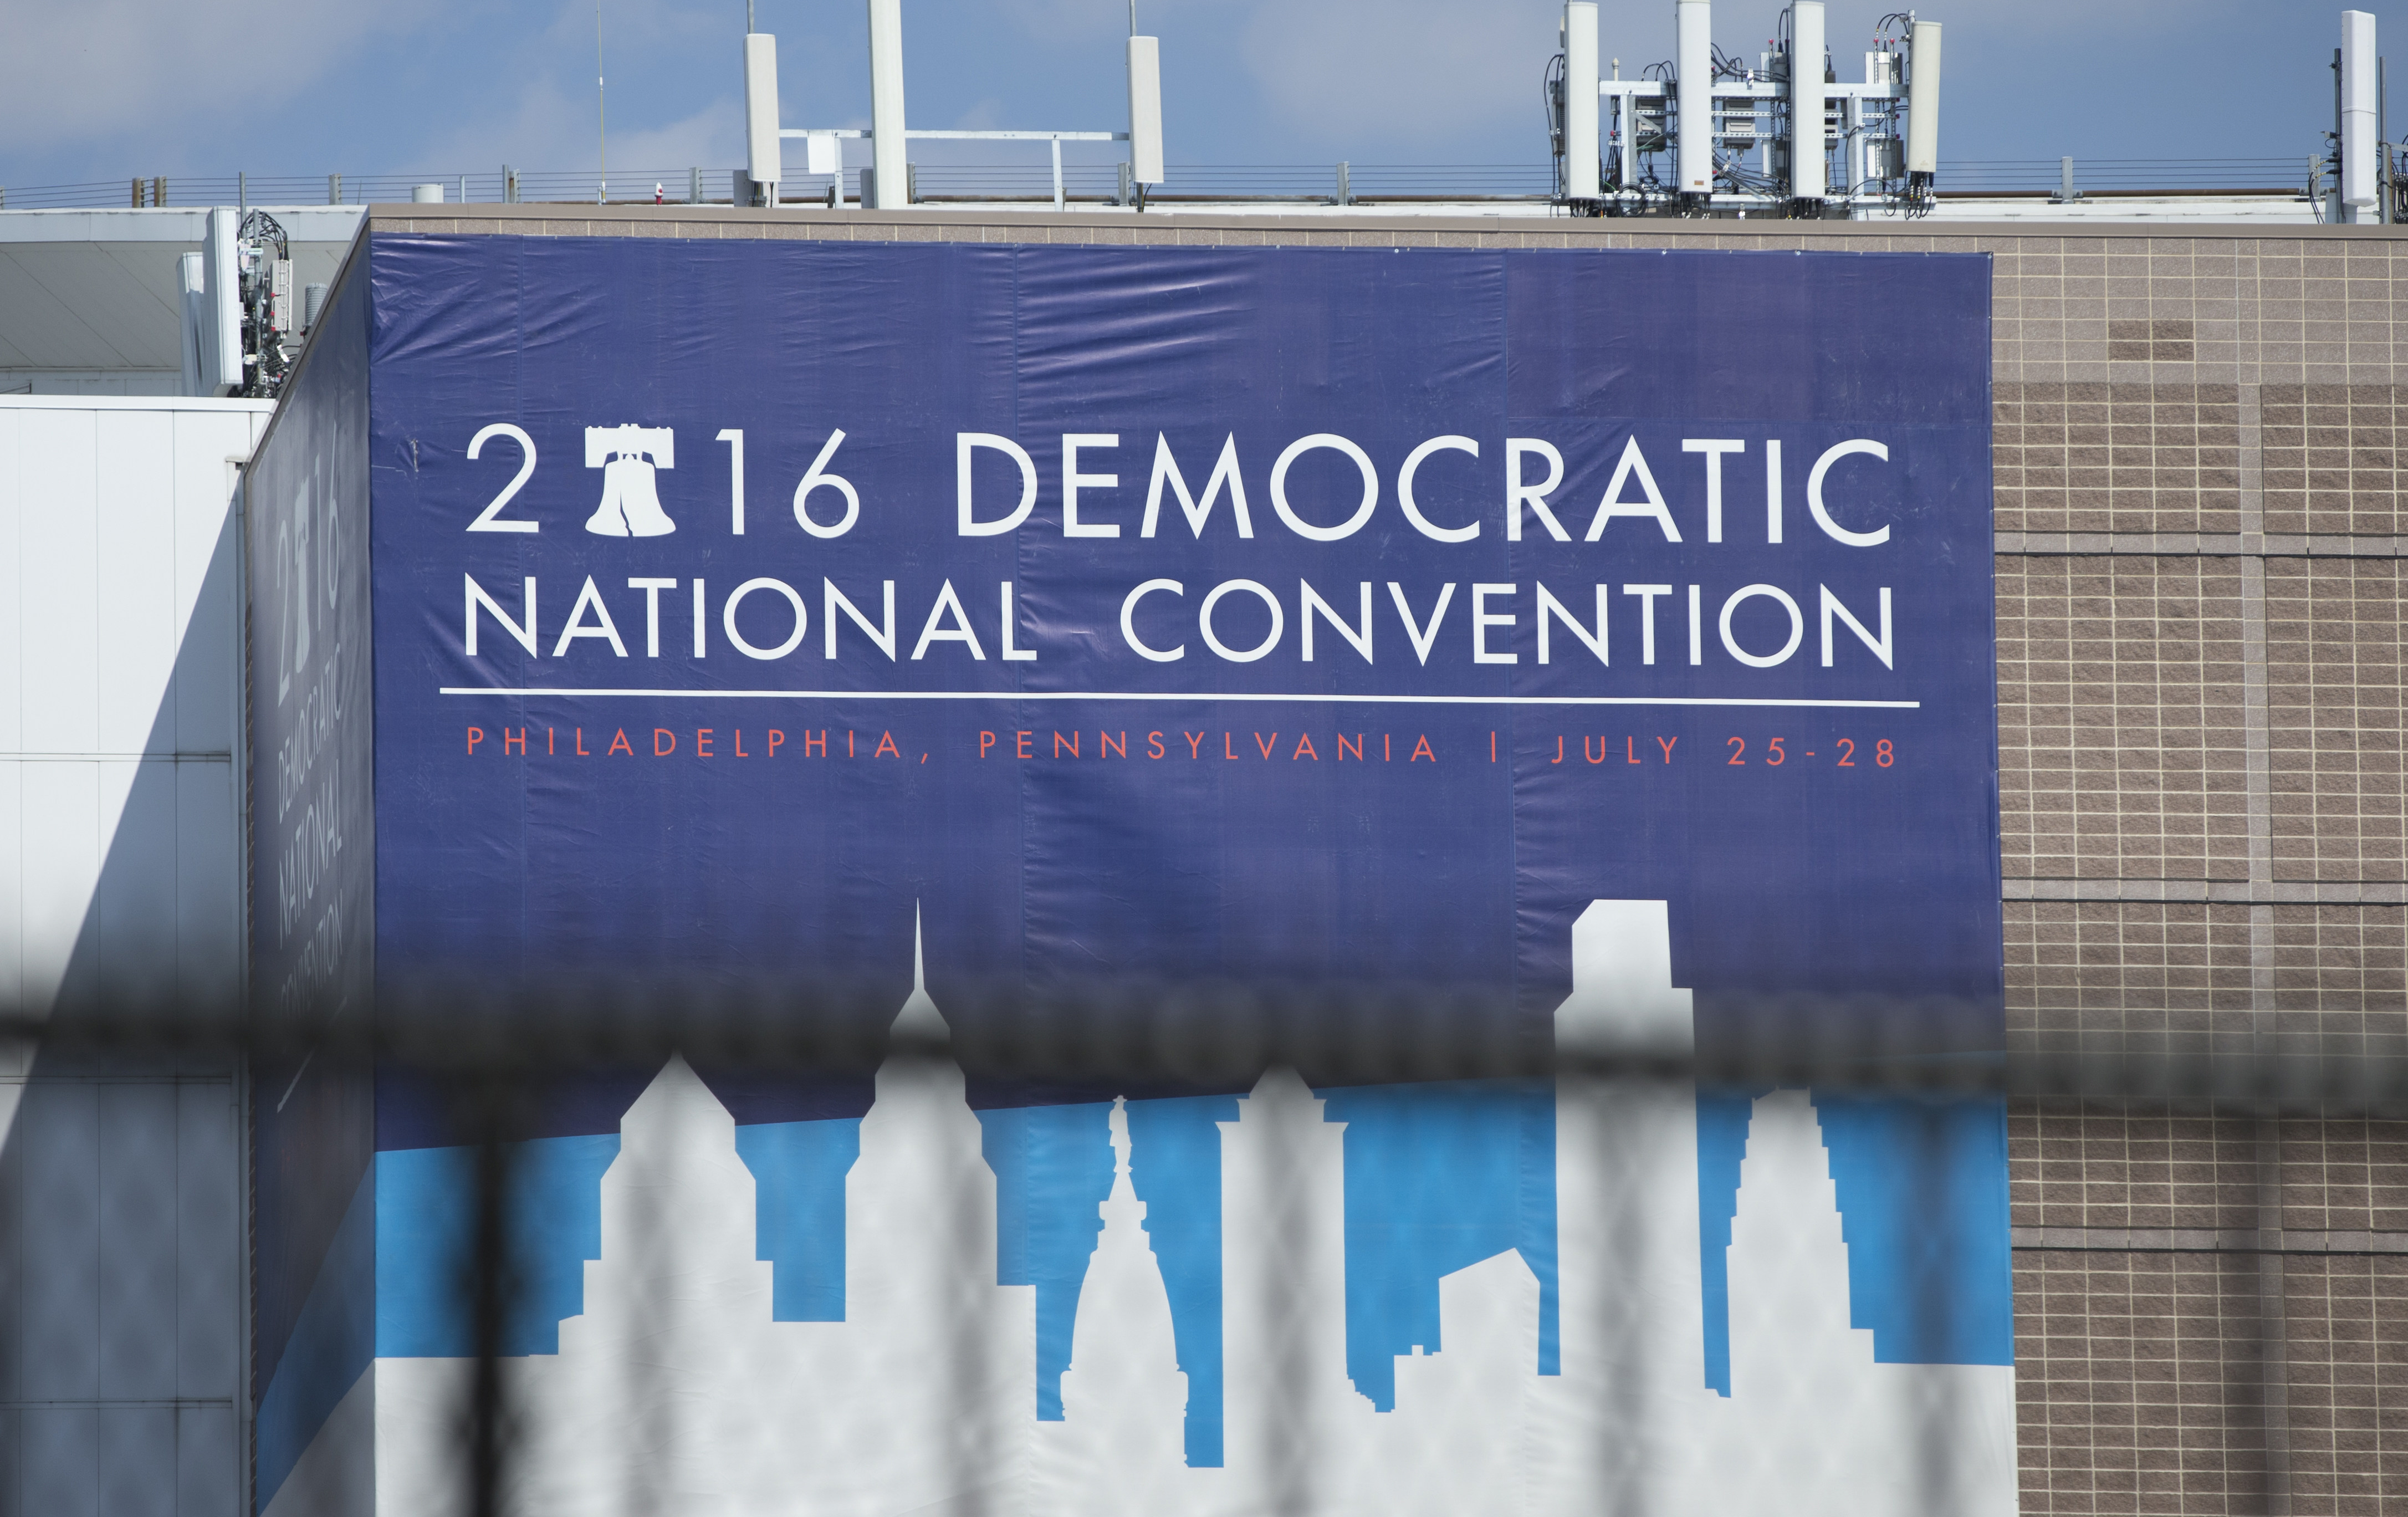 The Democratic National Convention Banner